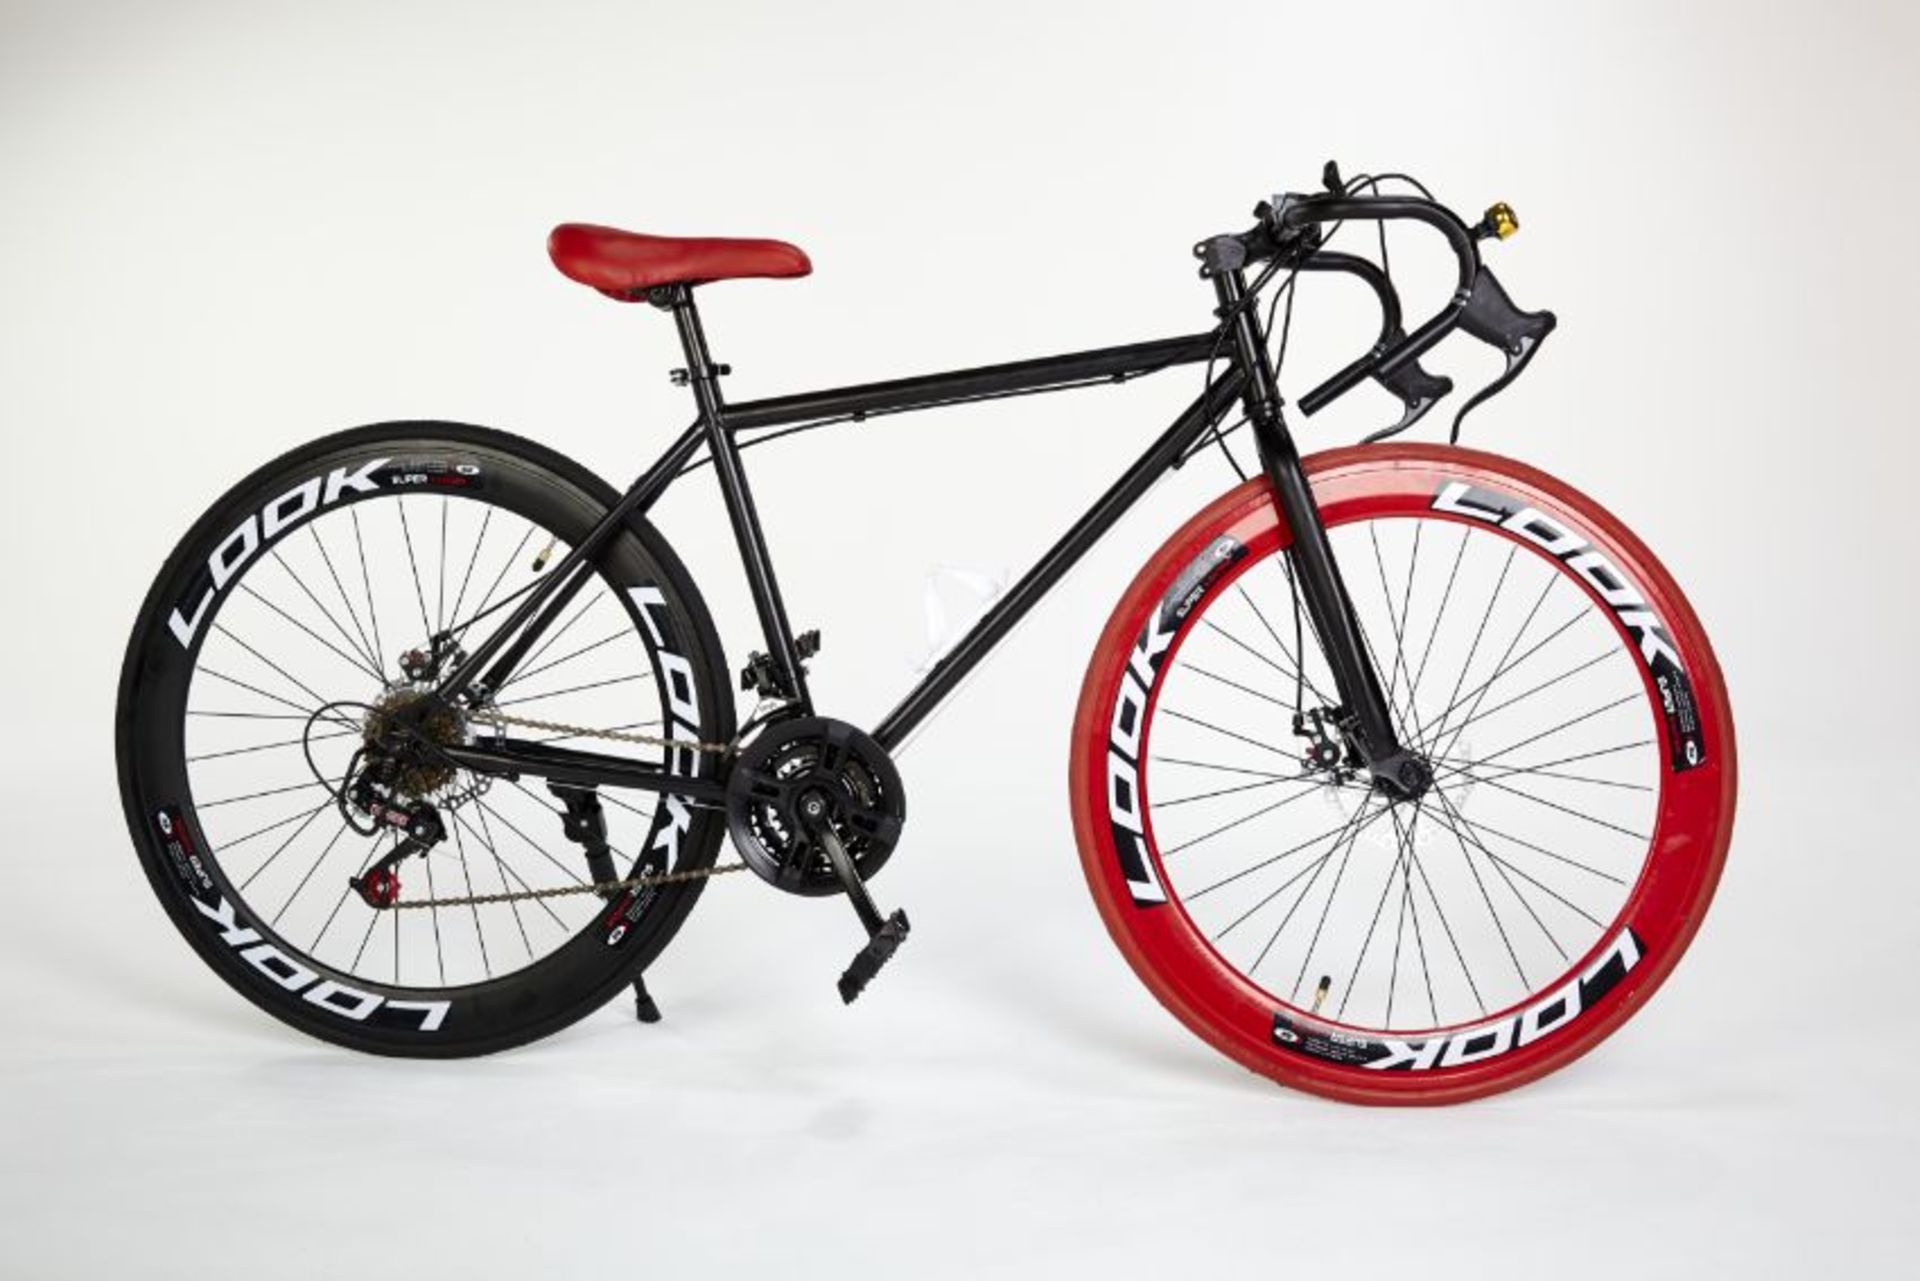 RED/BLACK STREET BIKE WITH 21 GREAR, BRAKE DISKS, KICK STAND, COOL THIN TYRES COMES BOXED - Image 6 of 10